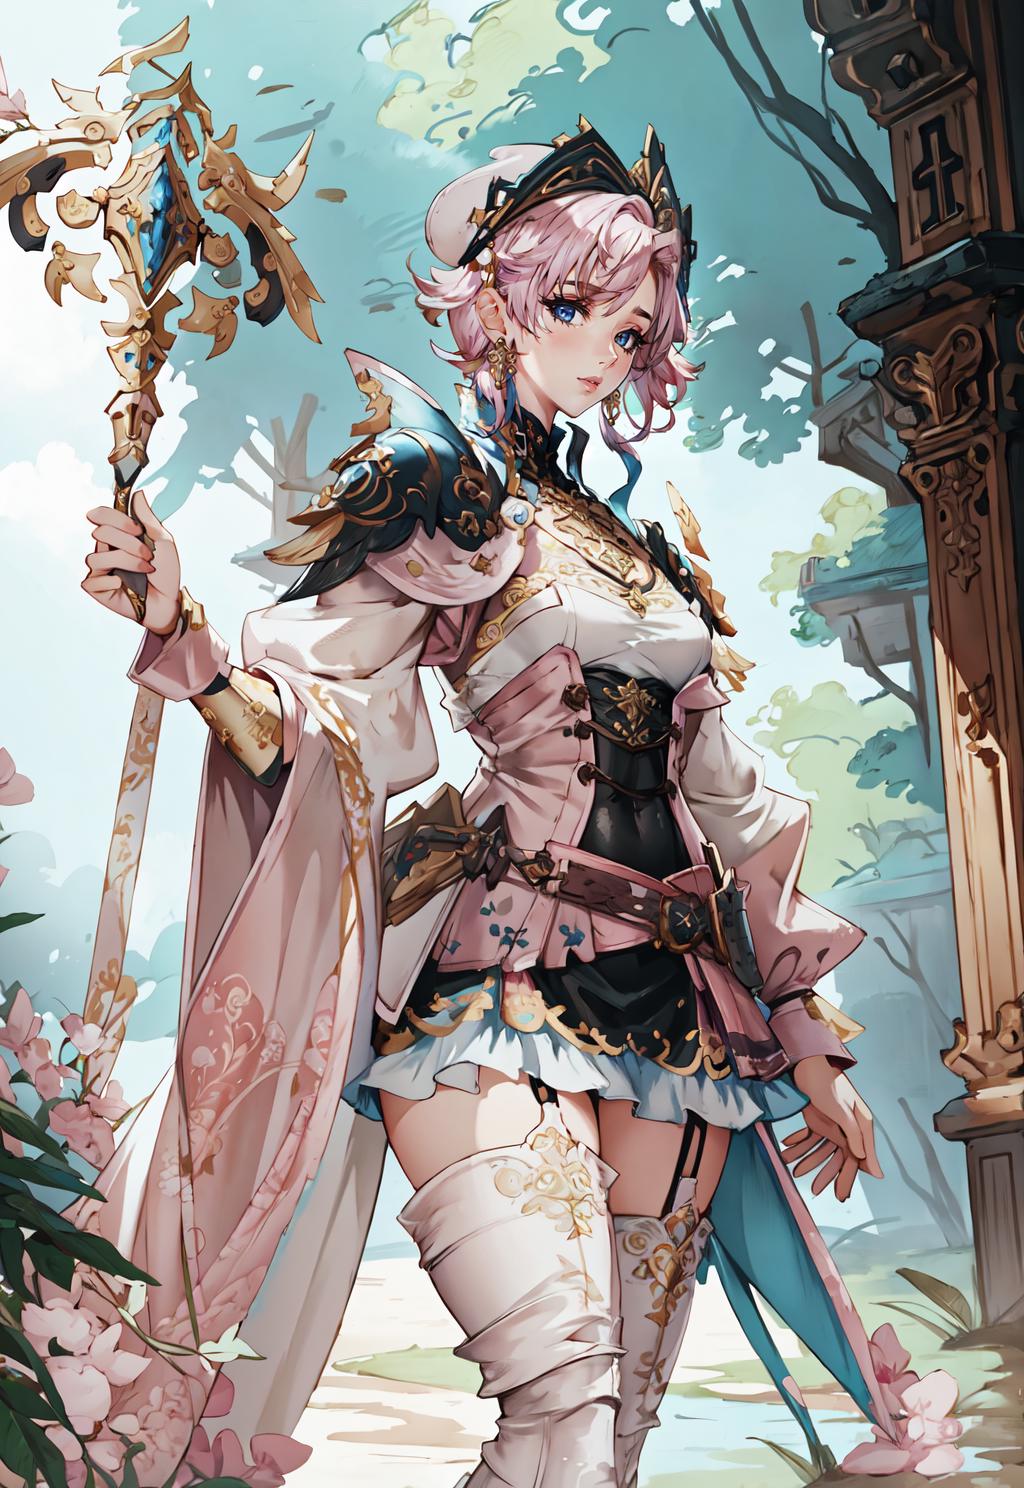 FF14 character concept art style image by NostalgiaForever